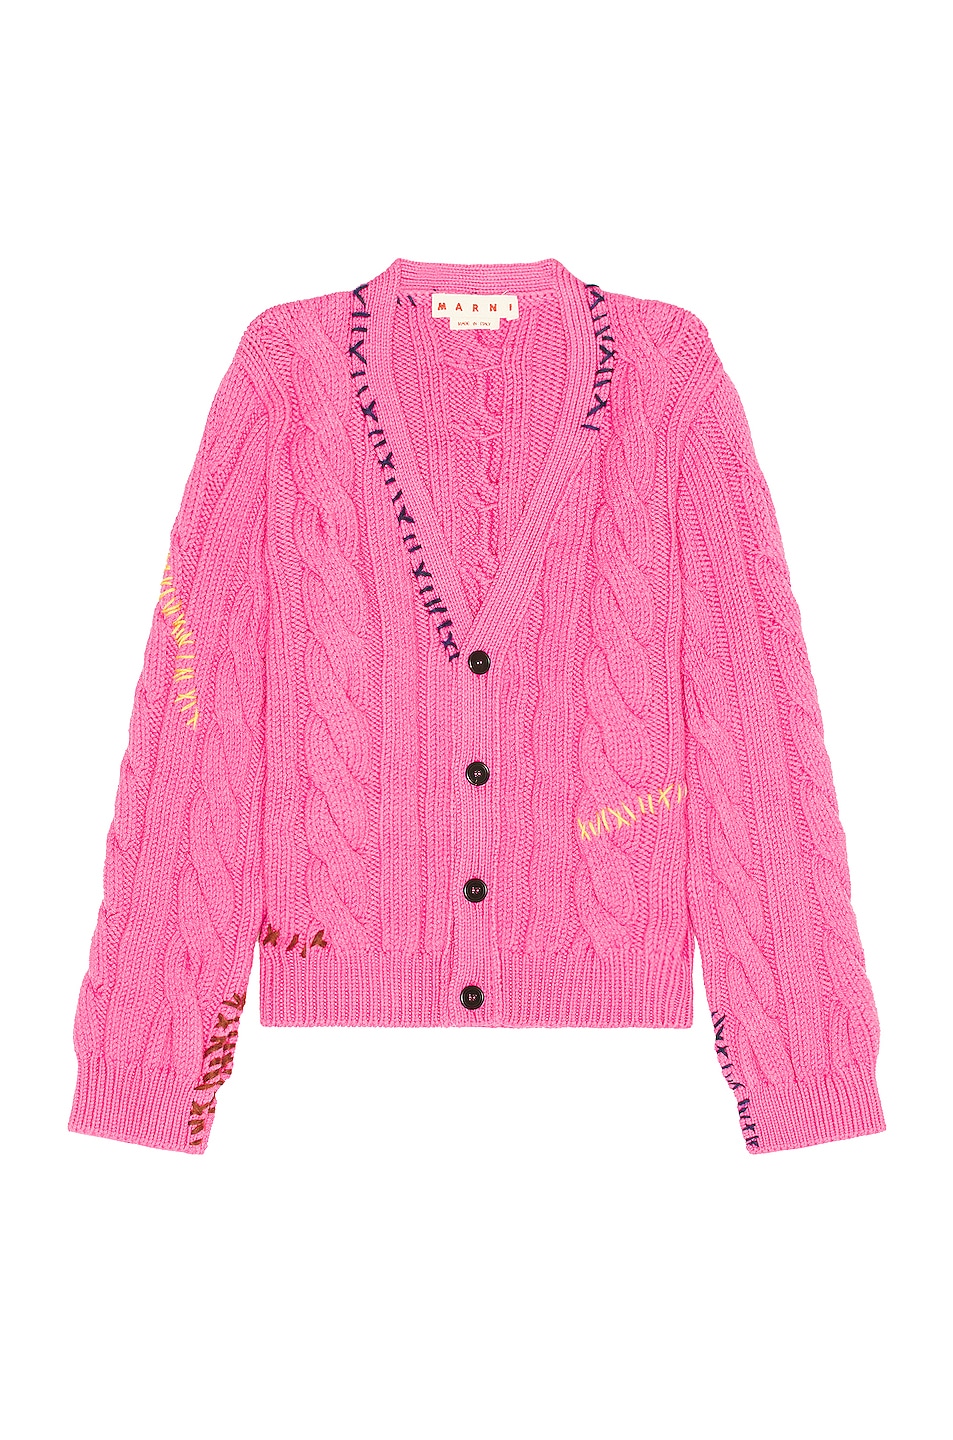 Image 1 of Marni Cable Knit Cardigan in Fuchsia